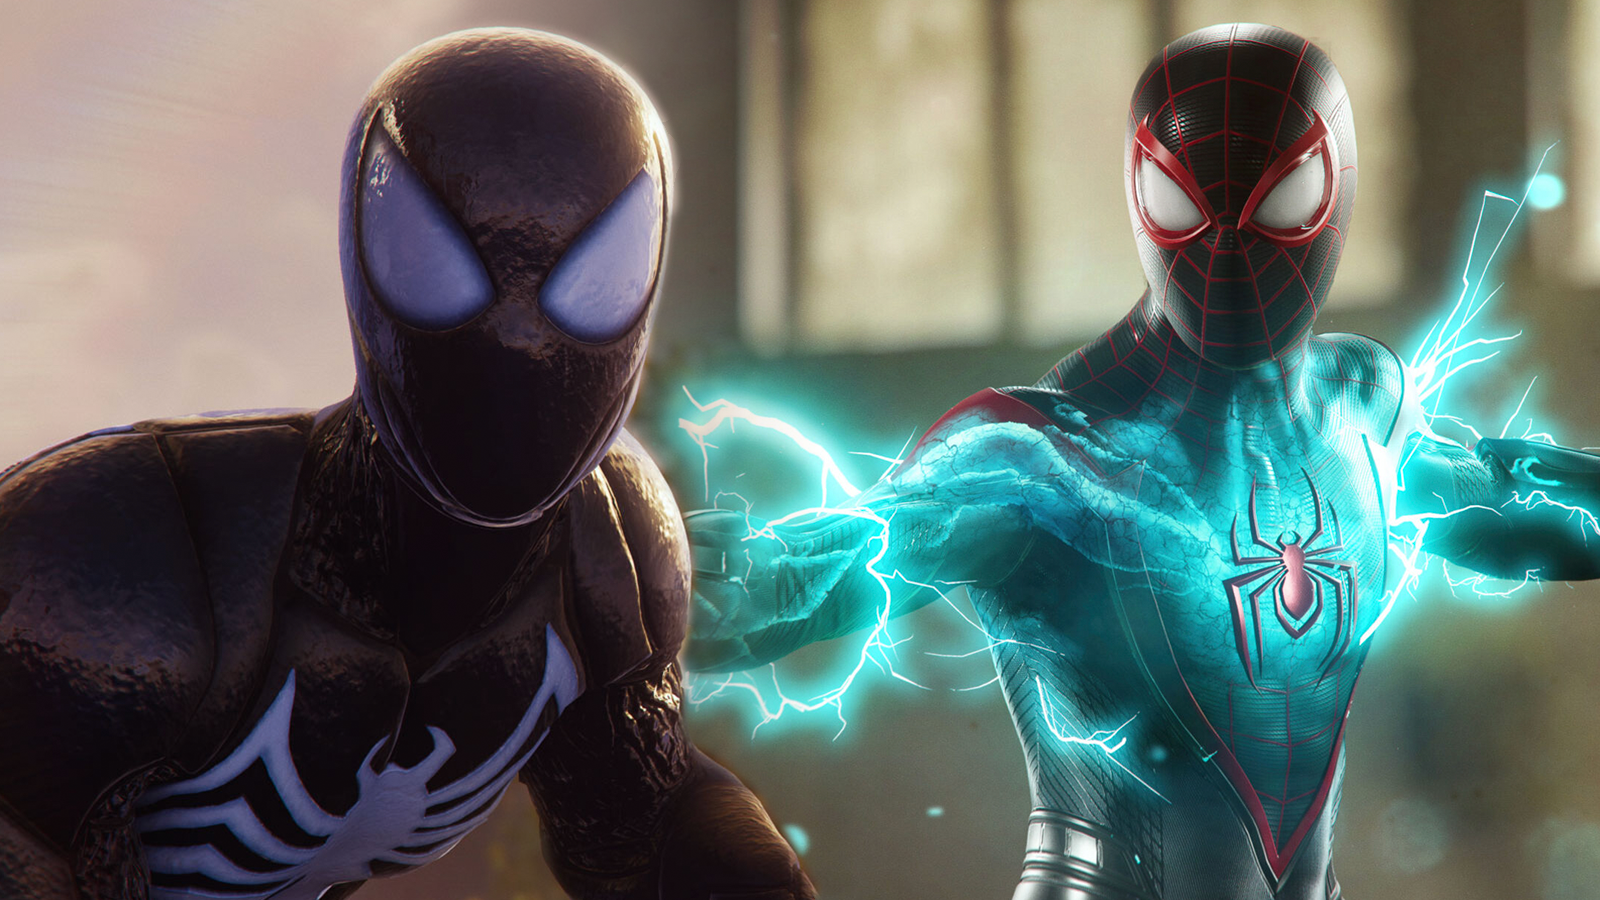 Marvel's Spider-Man 2: Is Online or Co-op Available?